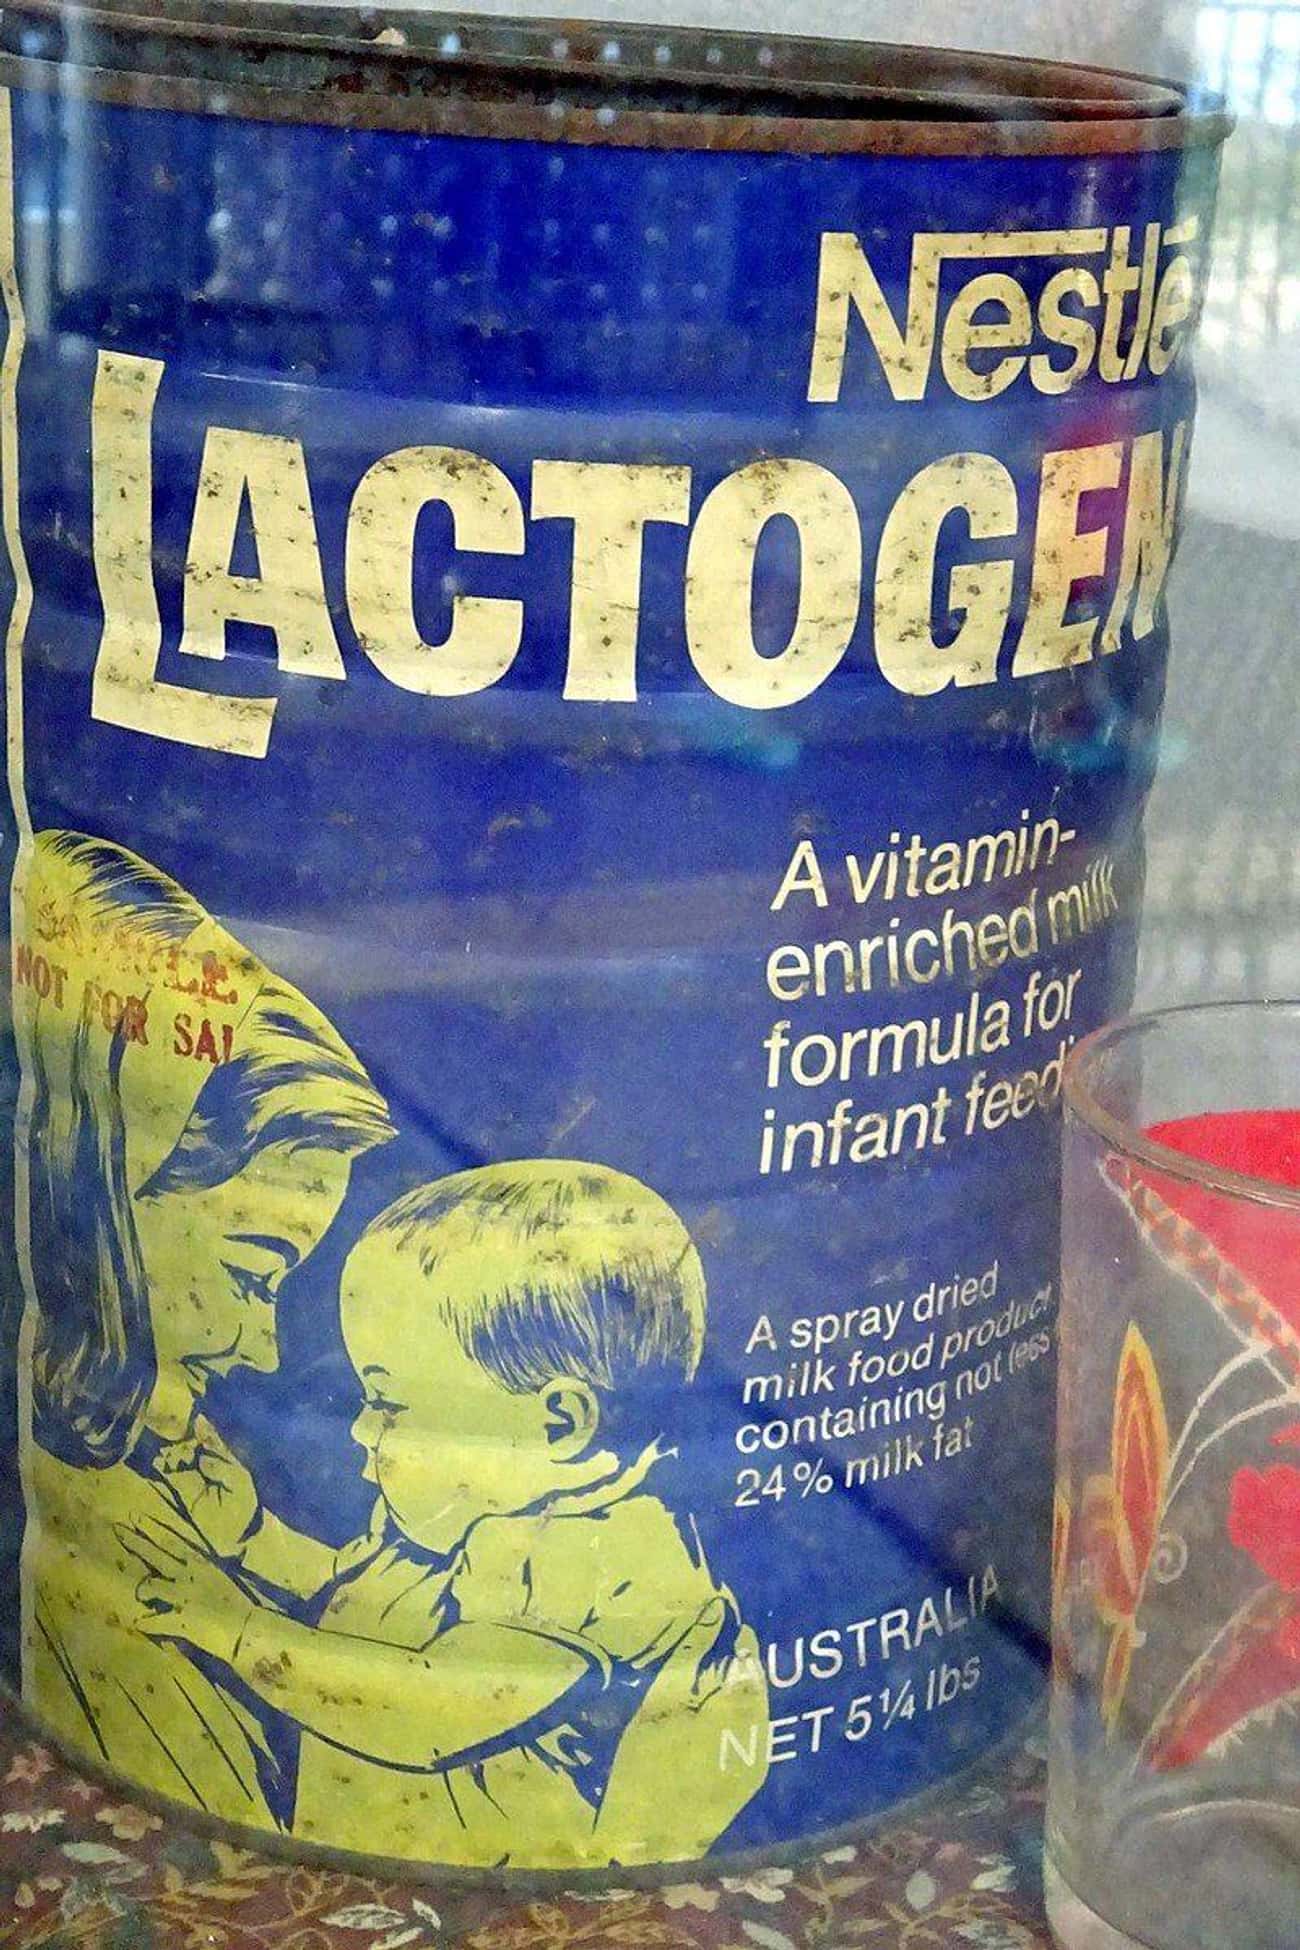 Mothers Lowered The Formula's Nutritional Value By Watering It Down